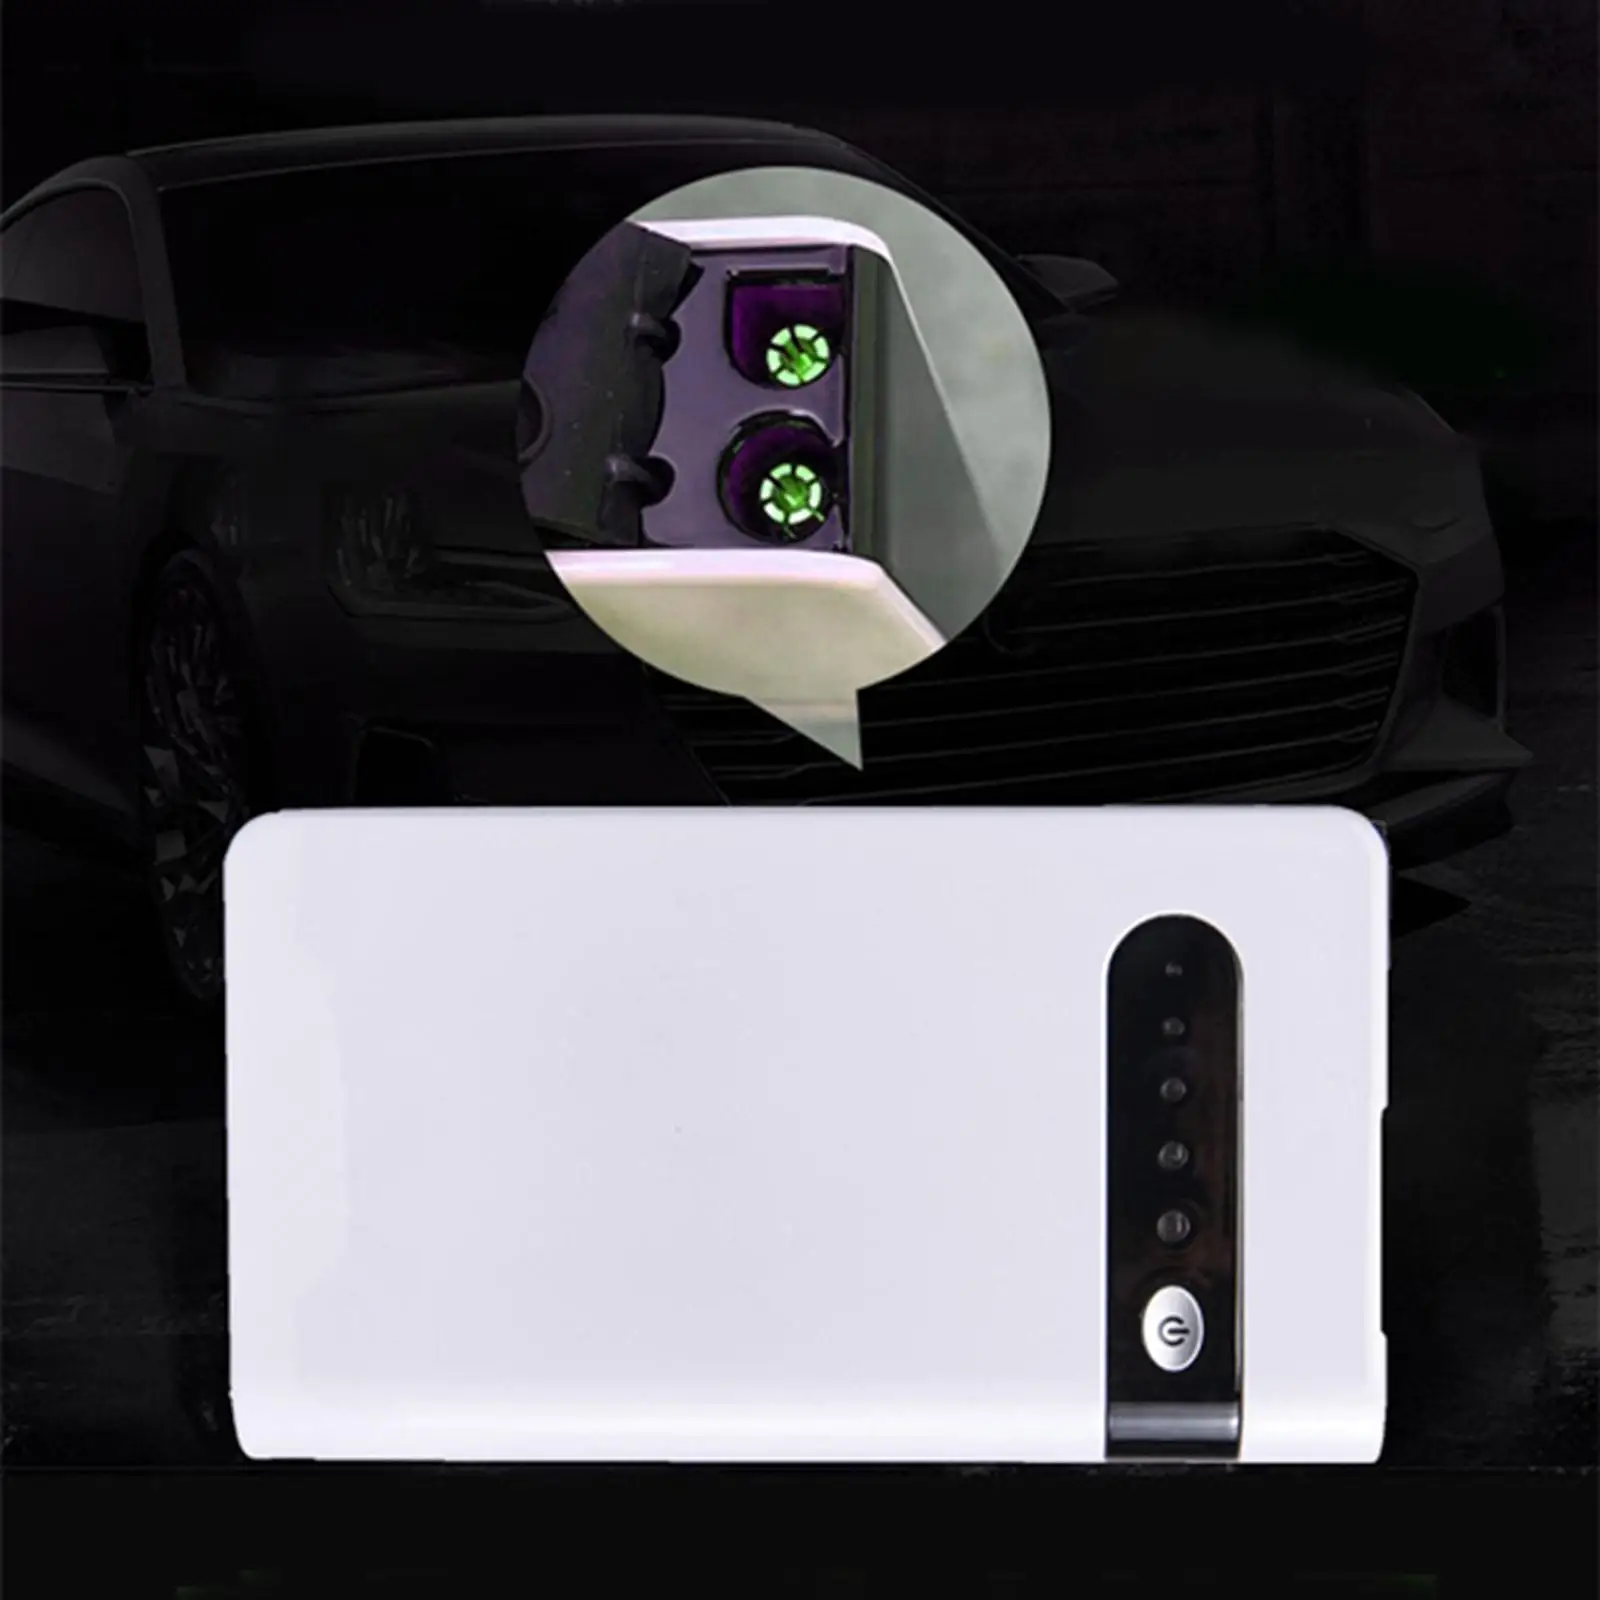 Car Jump Starter with Flashlight Portable 12V 8000mAh Power Pack Power Bank Charger Fit for MP4 Psp Mobile Phone Tablet Laptop